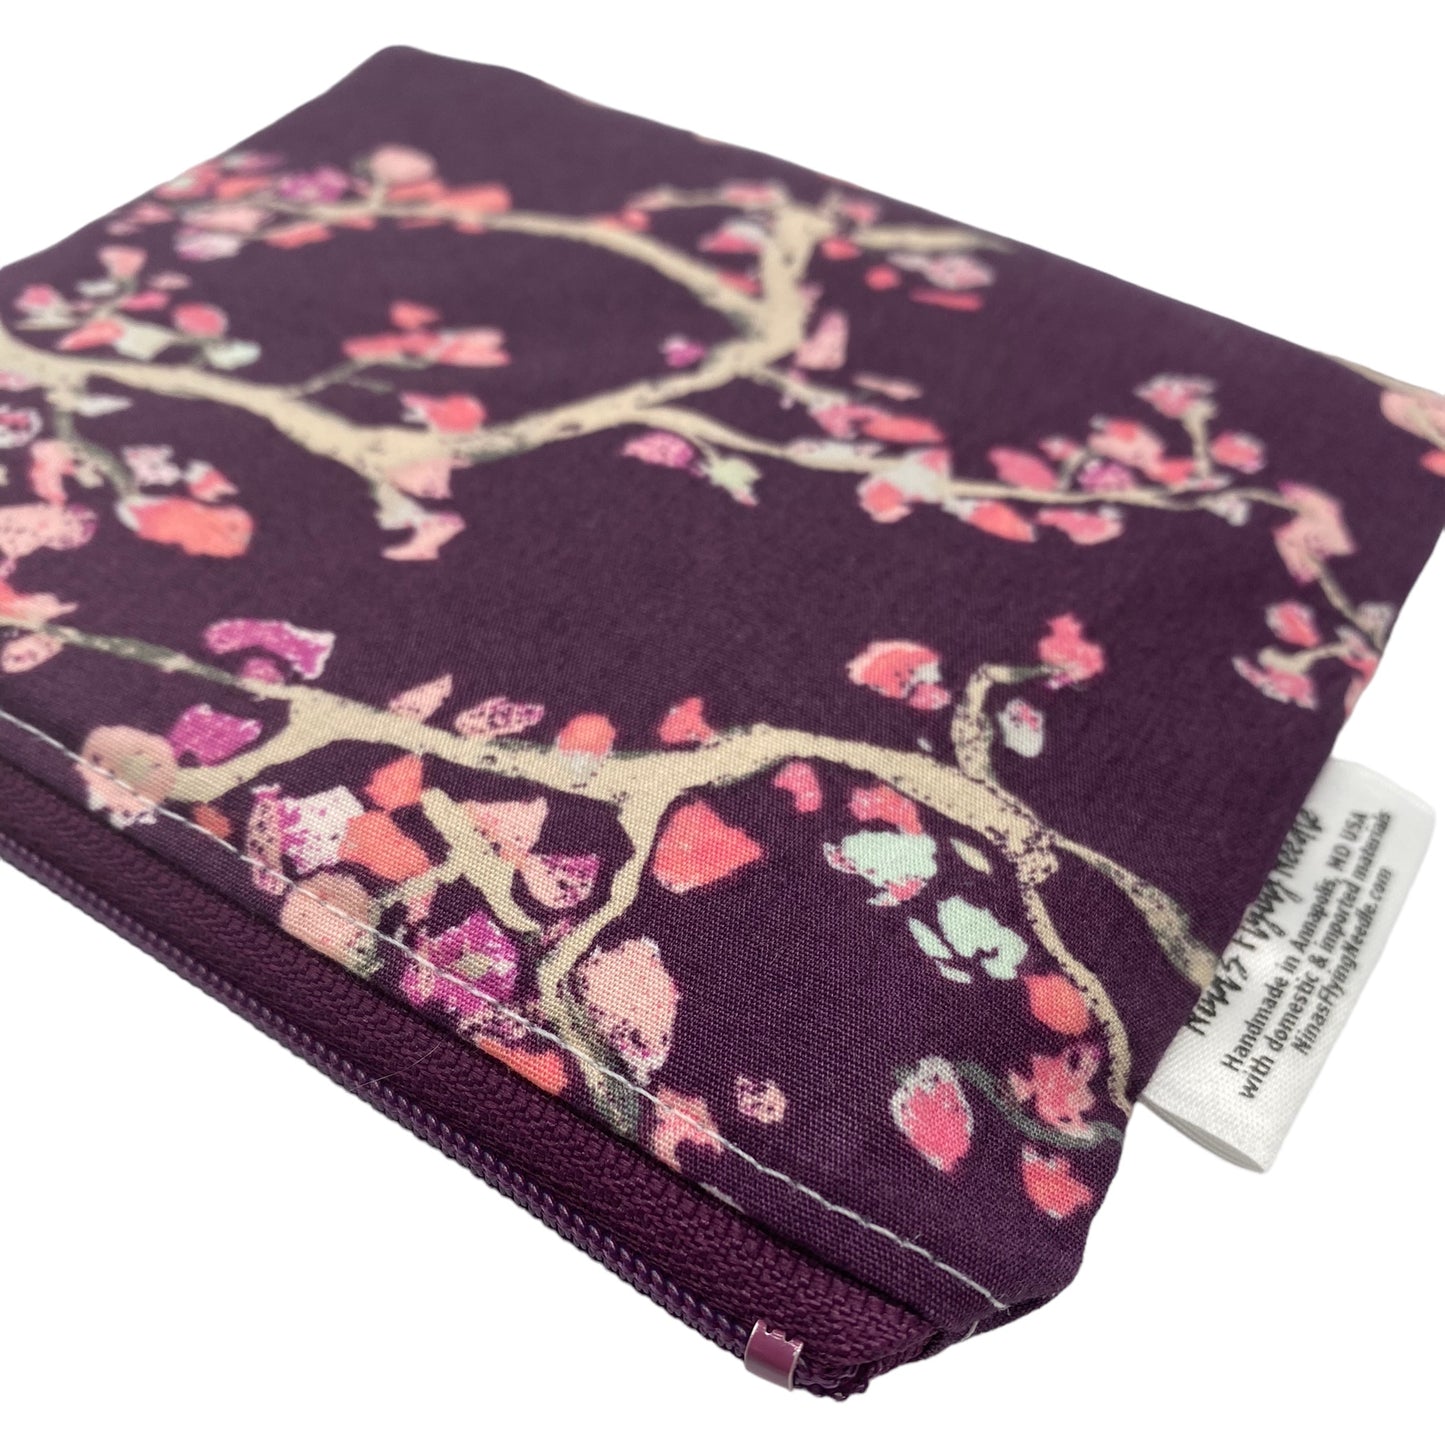 Toddler Sized Reusable Zippered Bag Cherry Blossoms